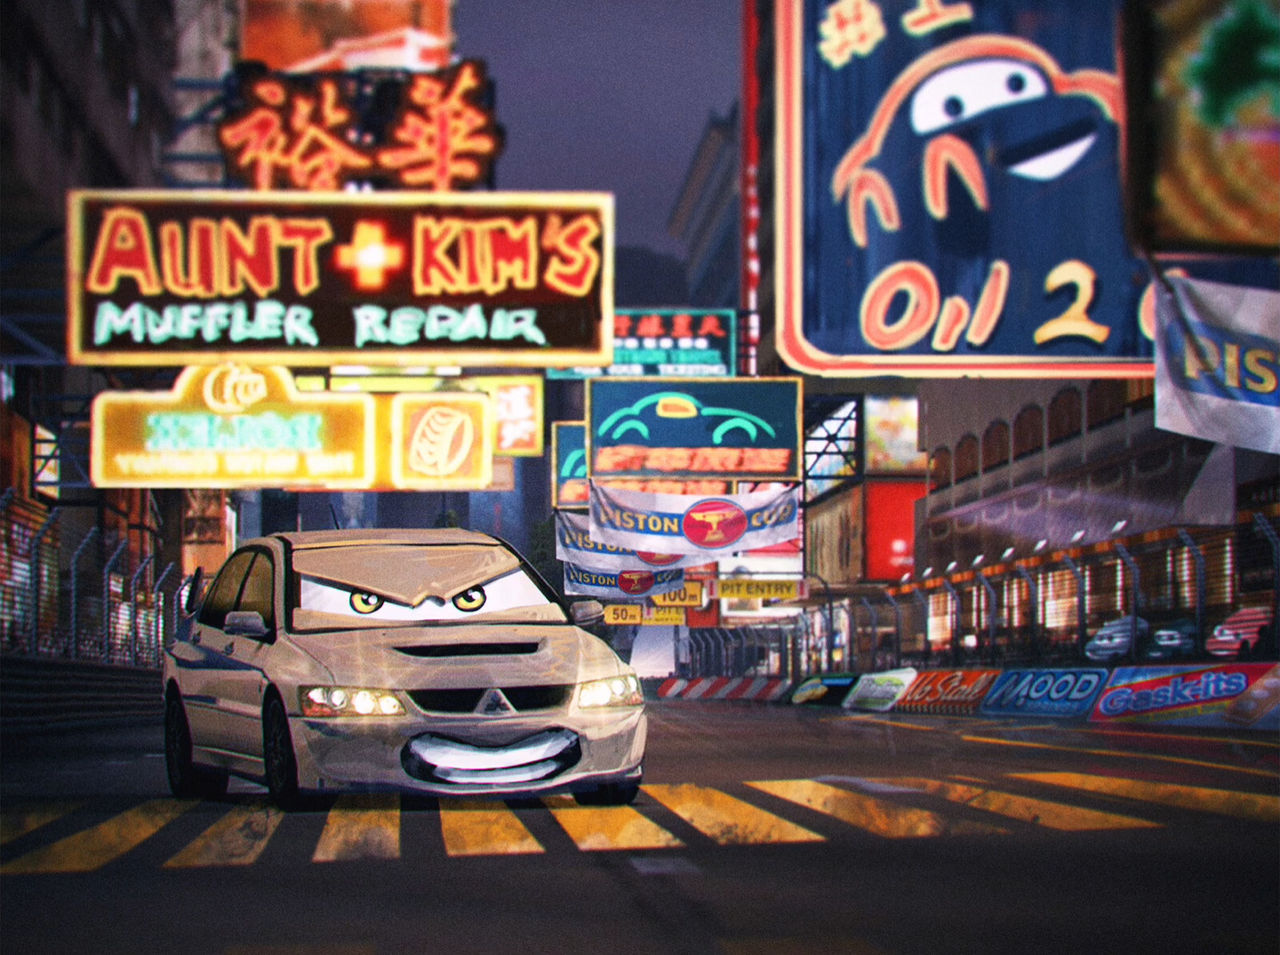 Cars Race O Rama on PS3 by CocoBandicoot31 on DeviantArt